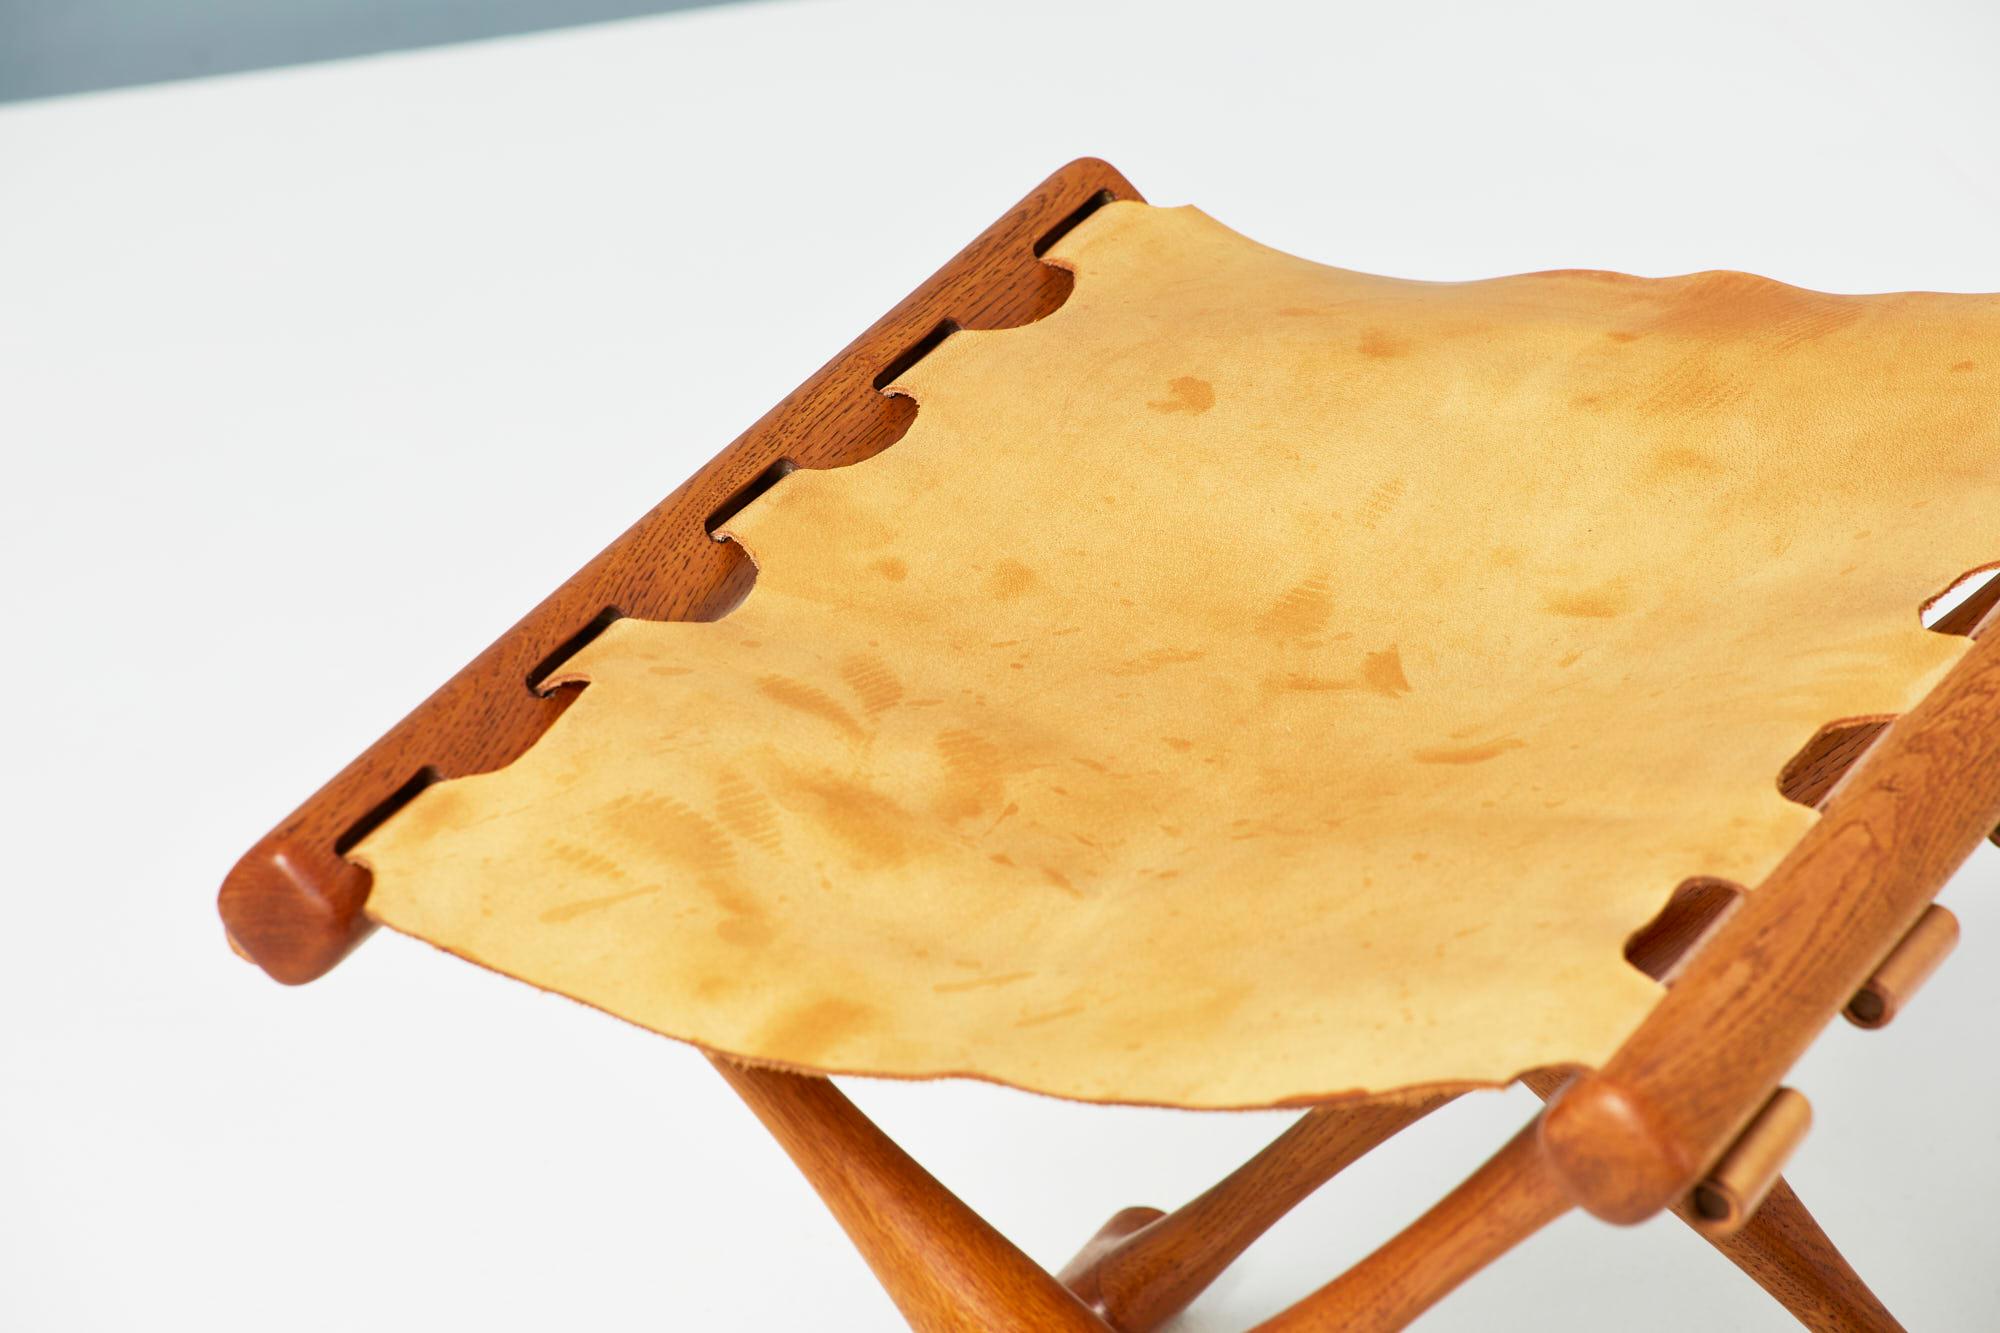 Poul Hundevad

Guldhoj folding stool, 1948

The iconic model 41 folding stool in beautifully aged Danish oak with original, patinated cognac brown saddle leather seat. The Guldhoj stool was designed as a replica of a Bronze Age artefact found in